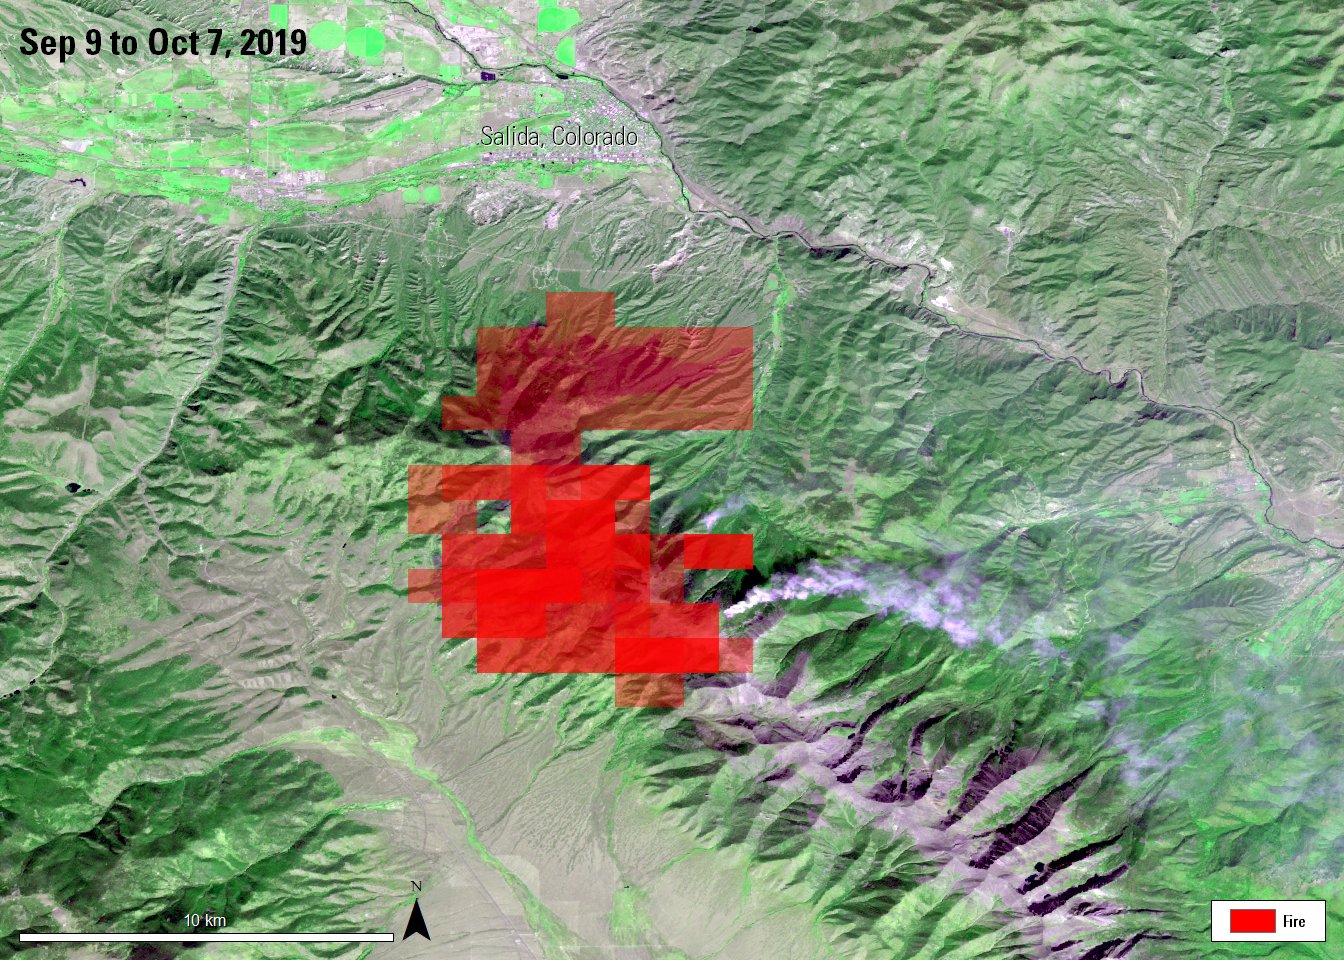 VNP14 products from Sep 9 to Oct 7, 2019 overlaid on AST_L1T image of Decker Fire near Salida, Colorado, acquired on October 12, 2019.